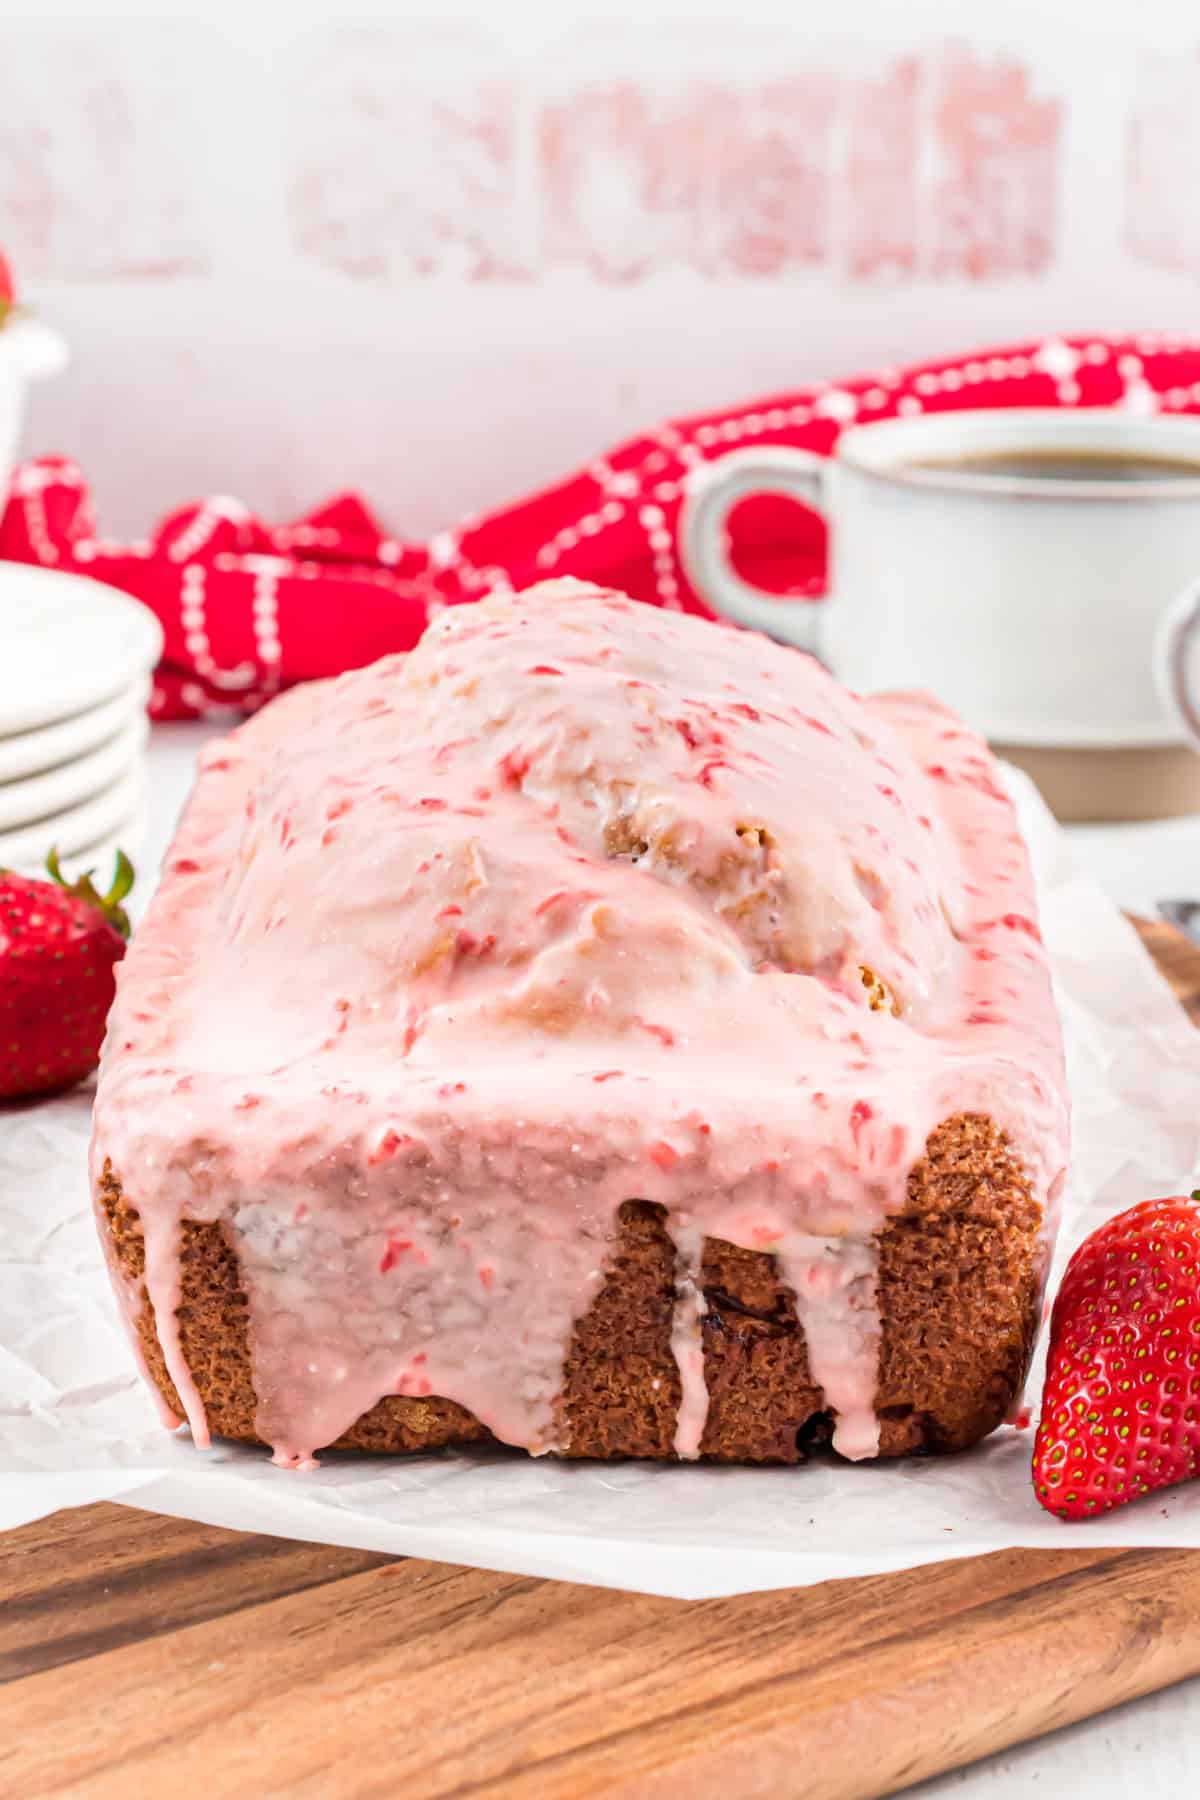 Loaf of bread covered in a strawberry icing.